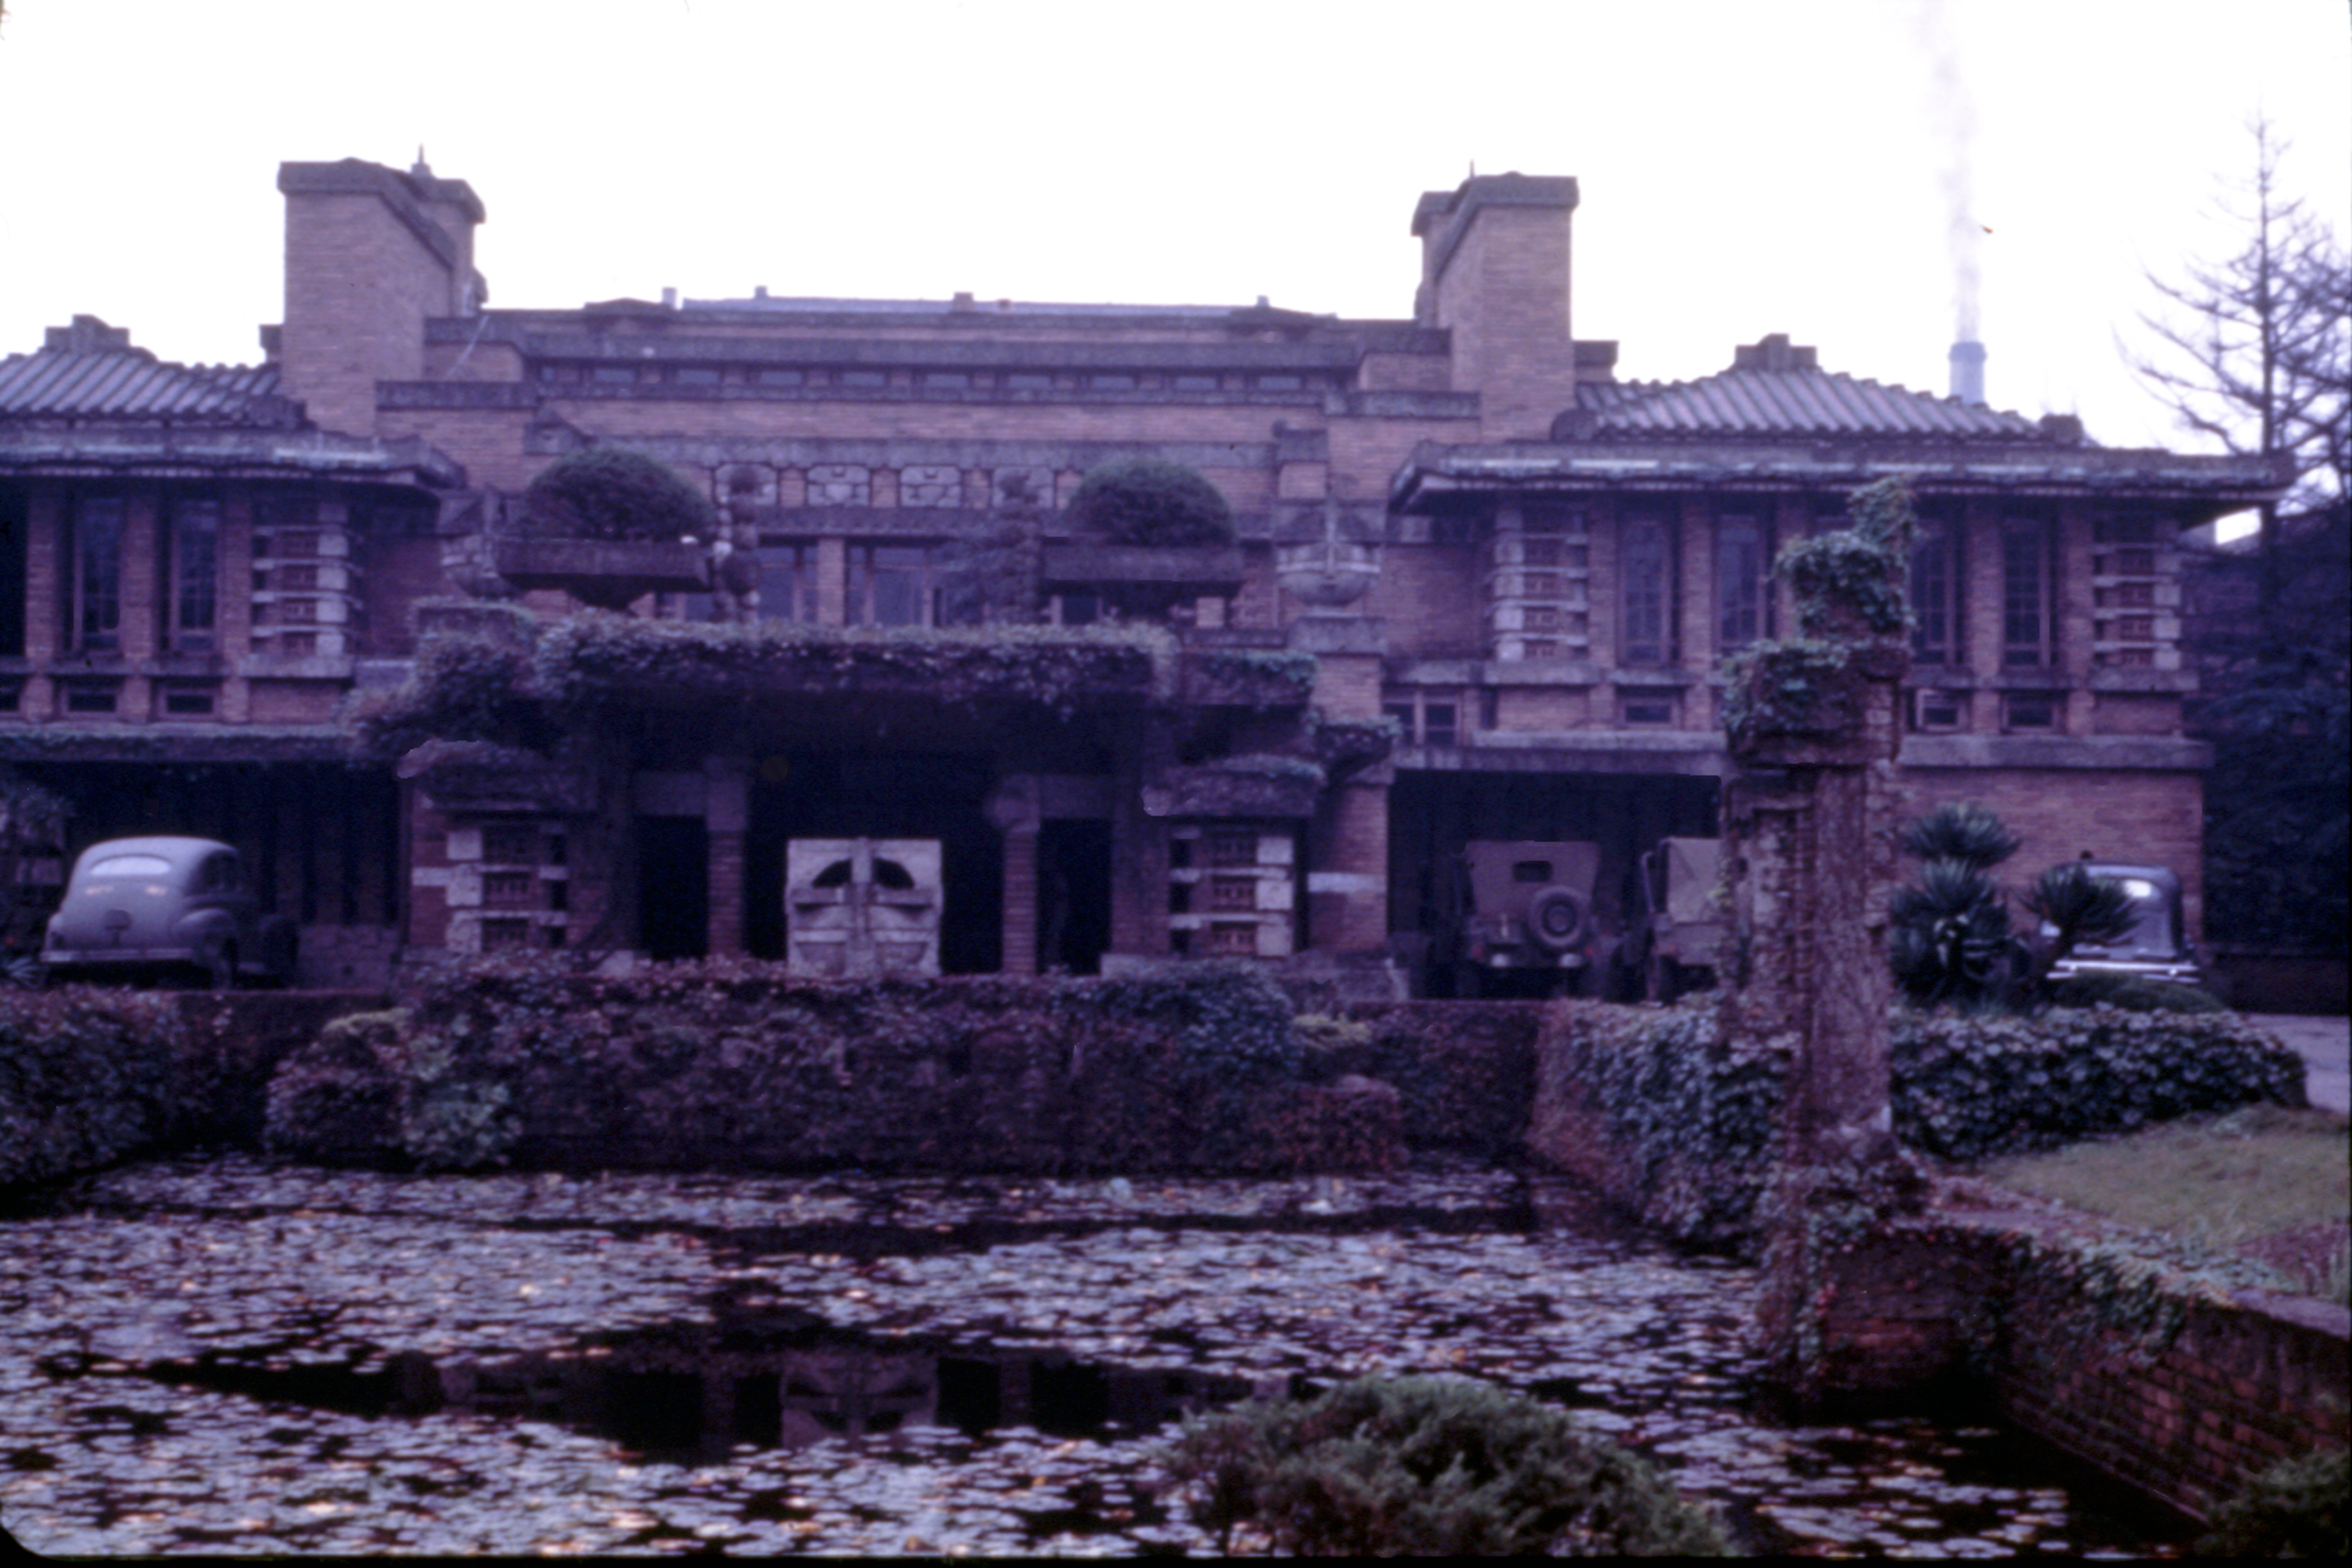 New Imperial Hotel, Tokyo, Japan, fall 1945